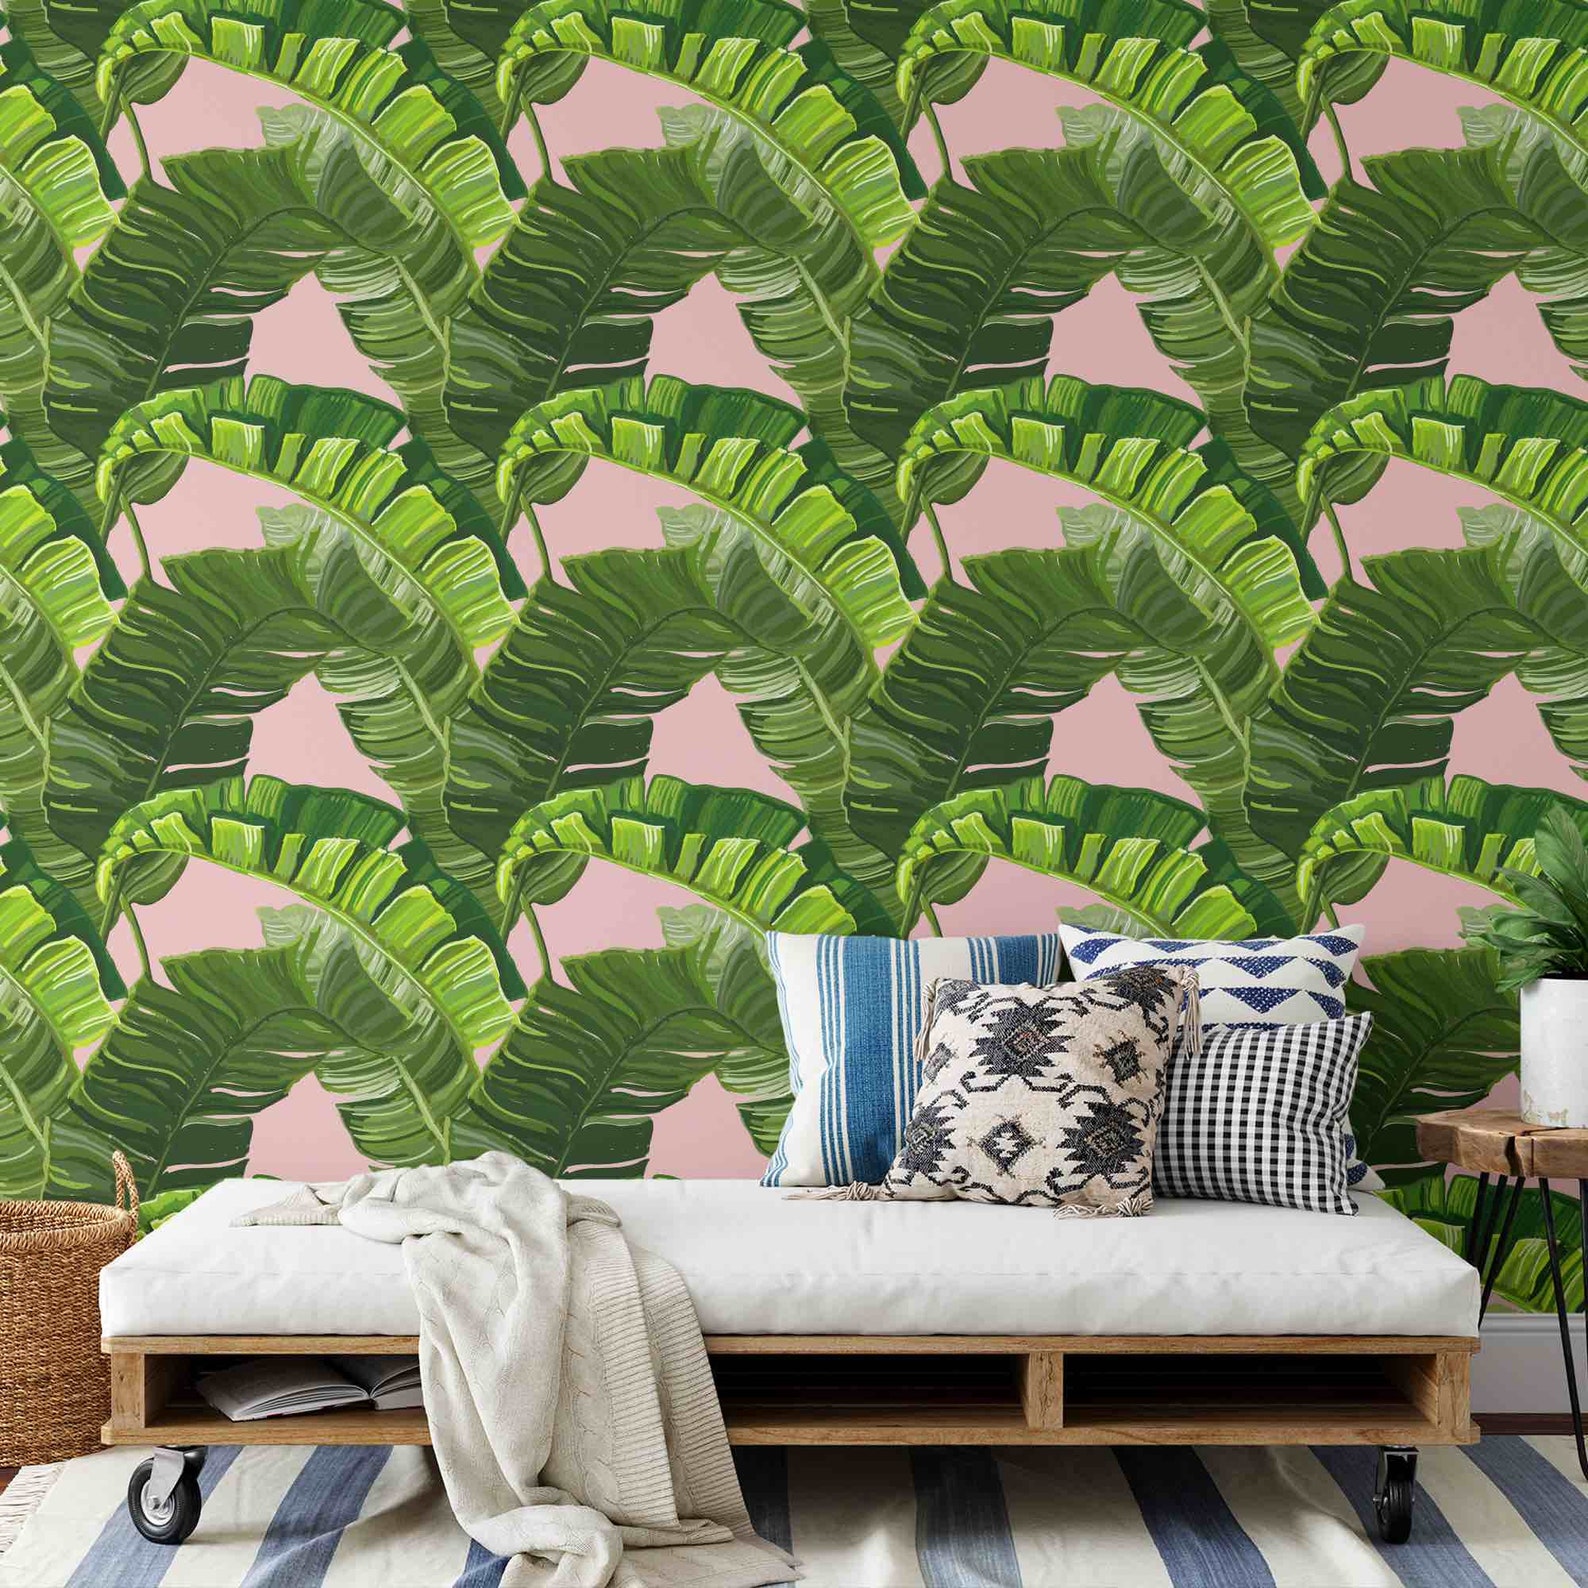 Pink Banana Leaf Wallpaper Removable Wallpaper Peel and | Etsy